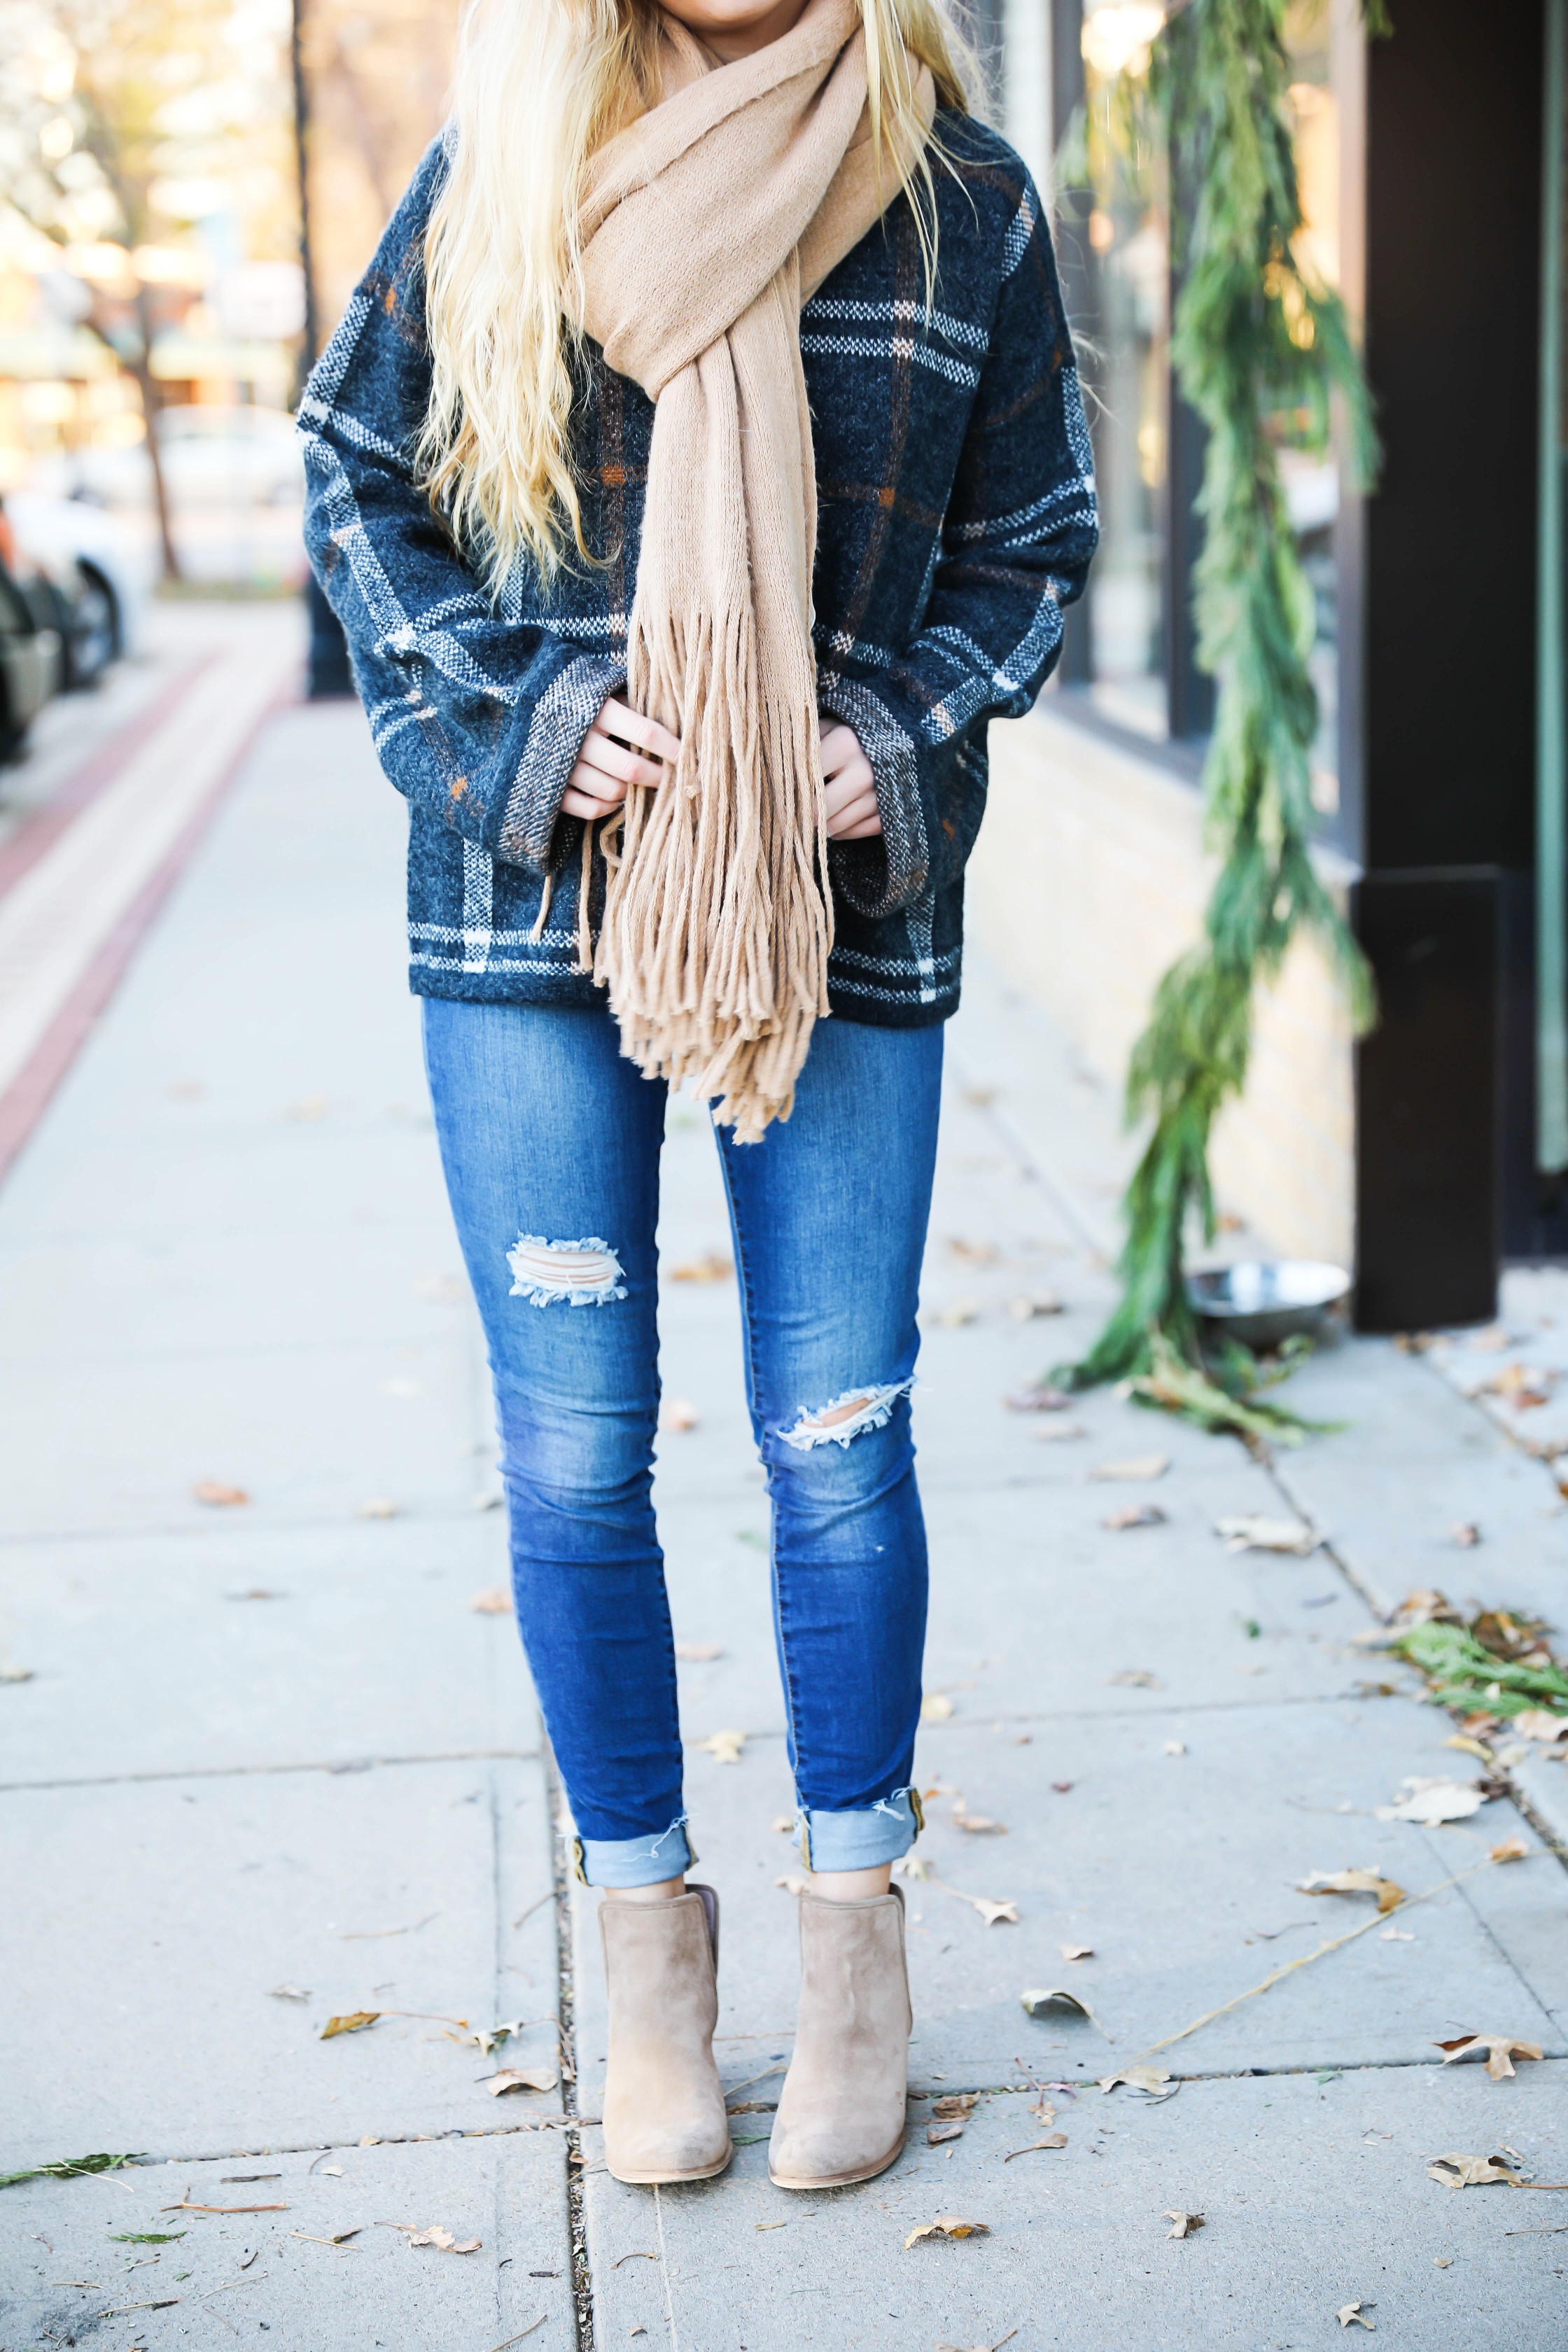 Plaid sweater with fringe free people scarf! Super cute winter outfit idea! Get all the details on fashion blog daily dose of charm by Lauren Lindmark